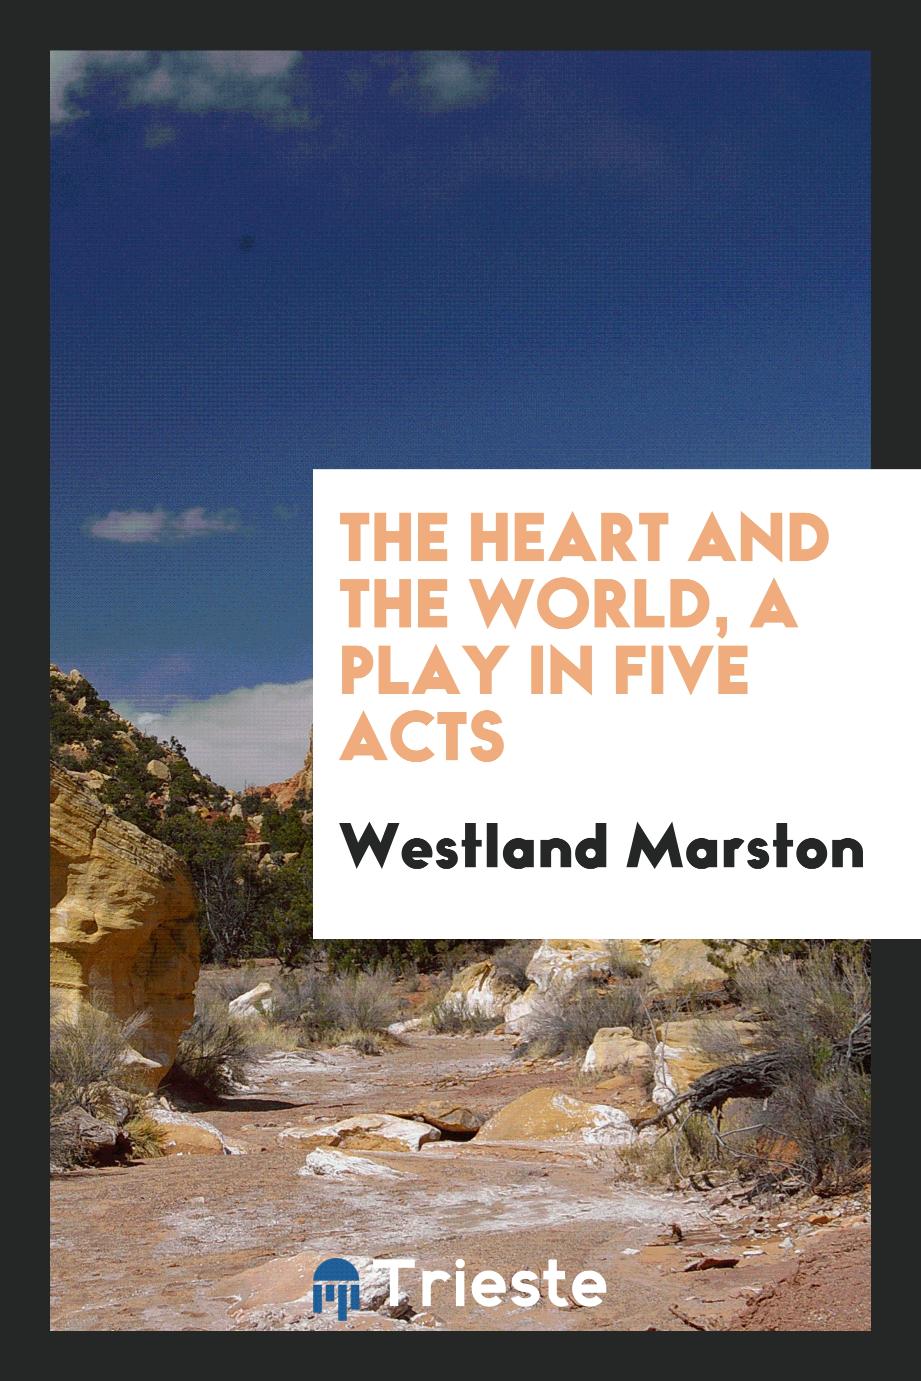 The heart and the world, a play in Five Acts